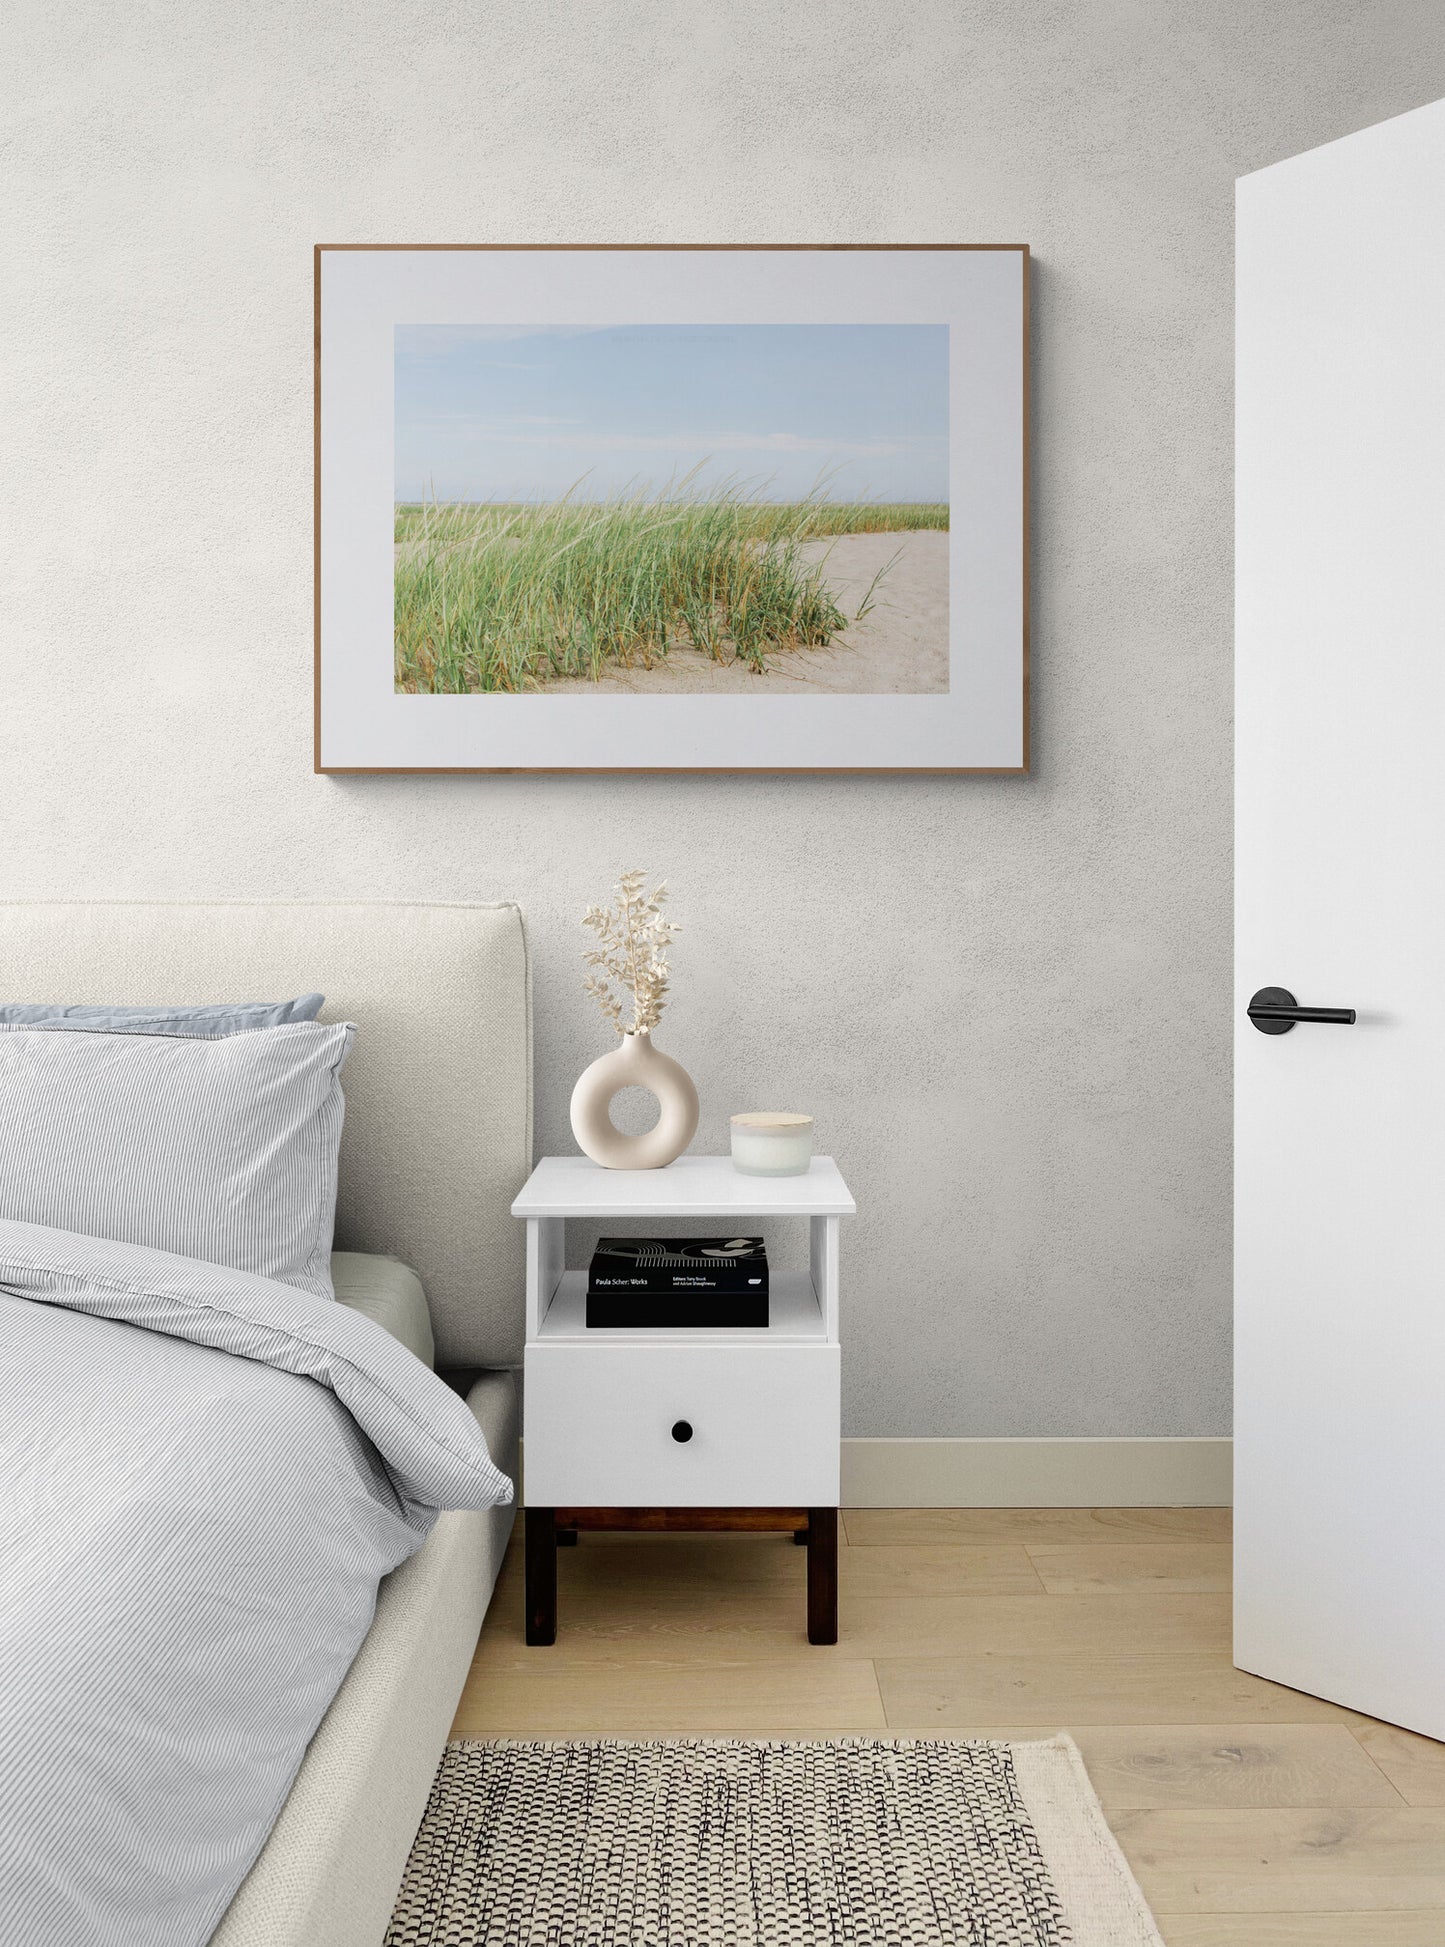 Seagrass and Sand on Cape Cod as Bedroom Wall Photography Print